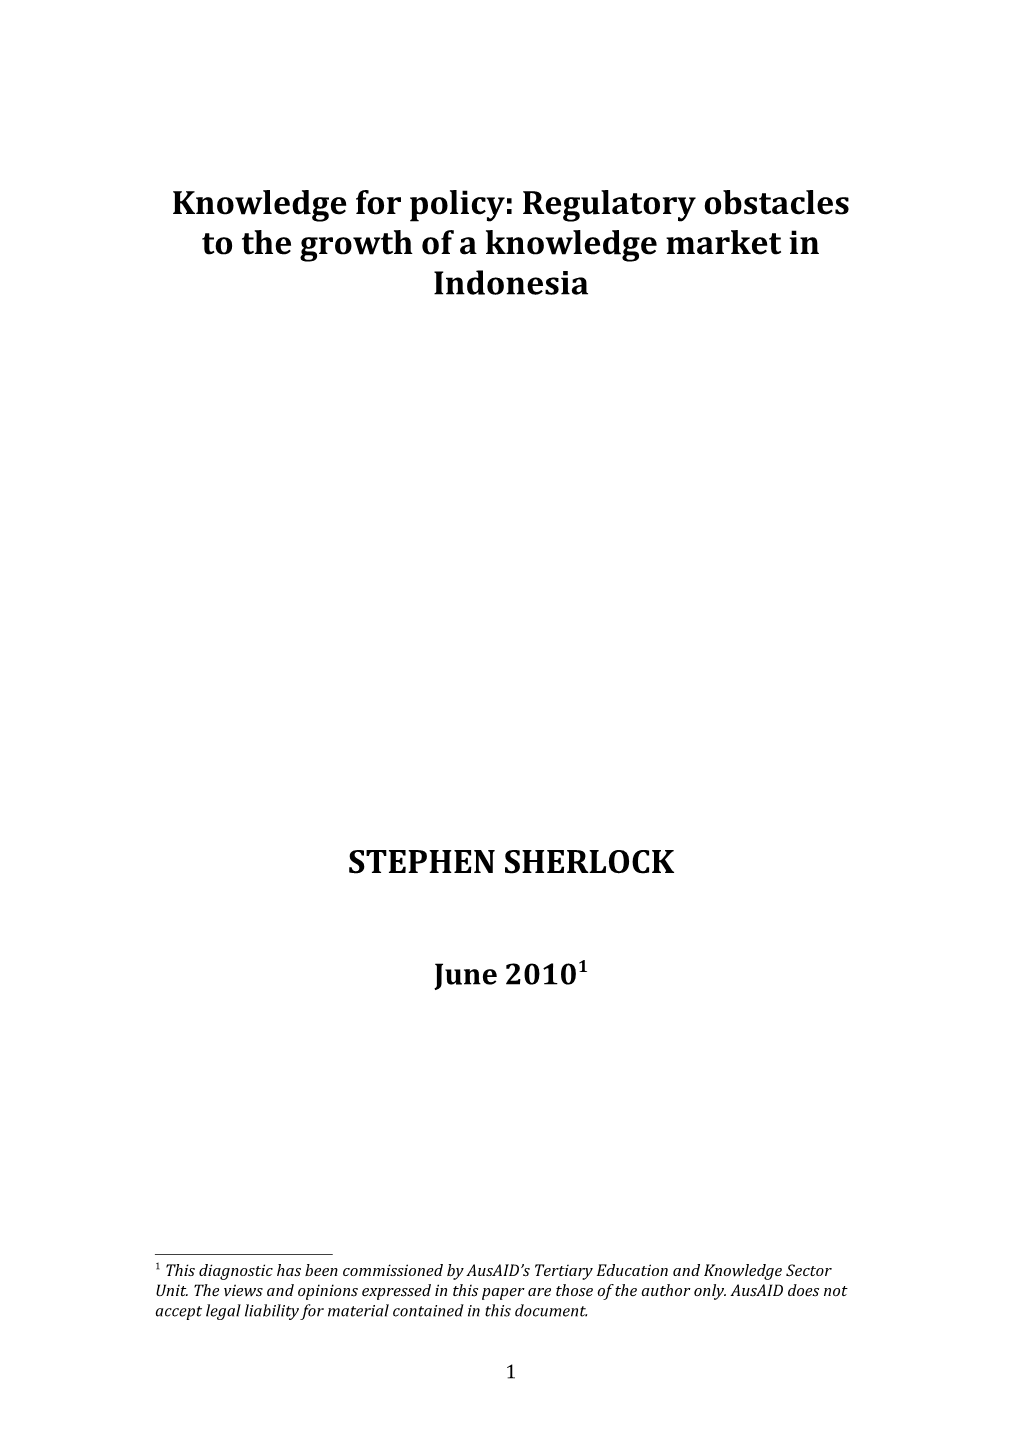 Knowledge for Policy: Regulatory Obstacles to the Growth of a Knowledge Market in Indonesia